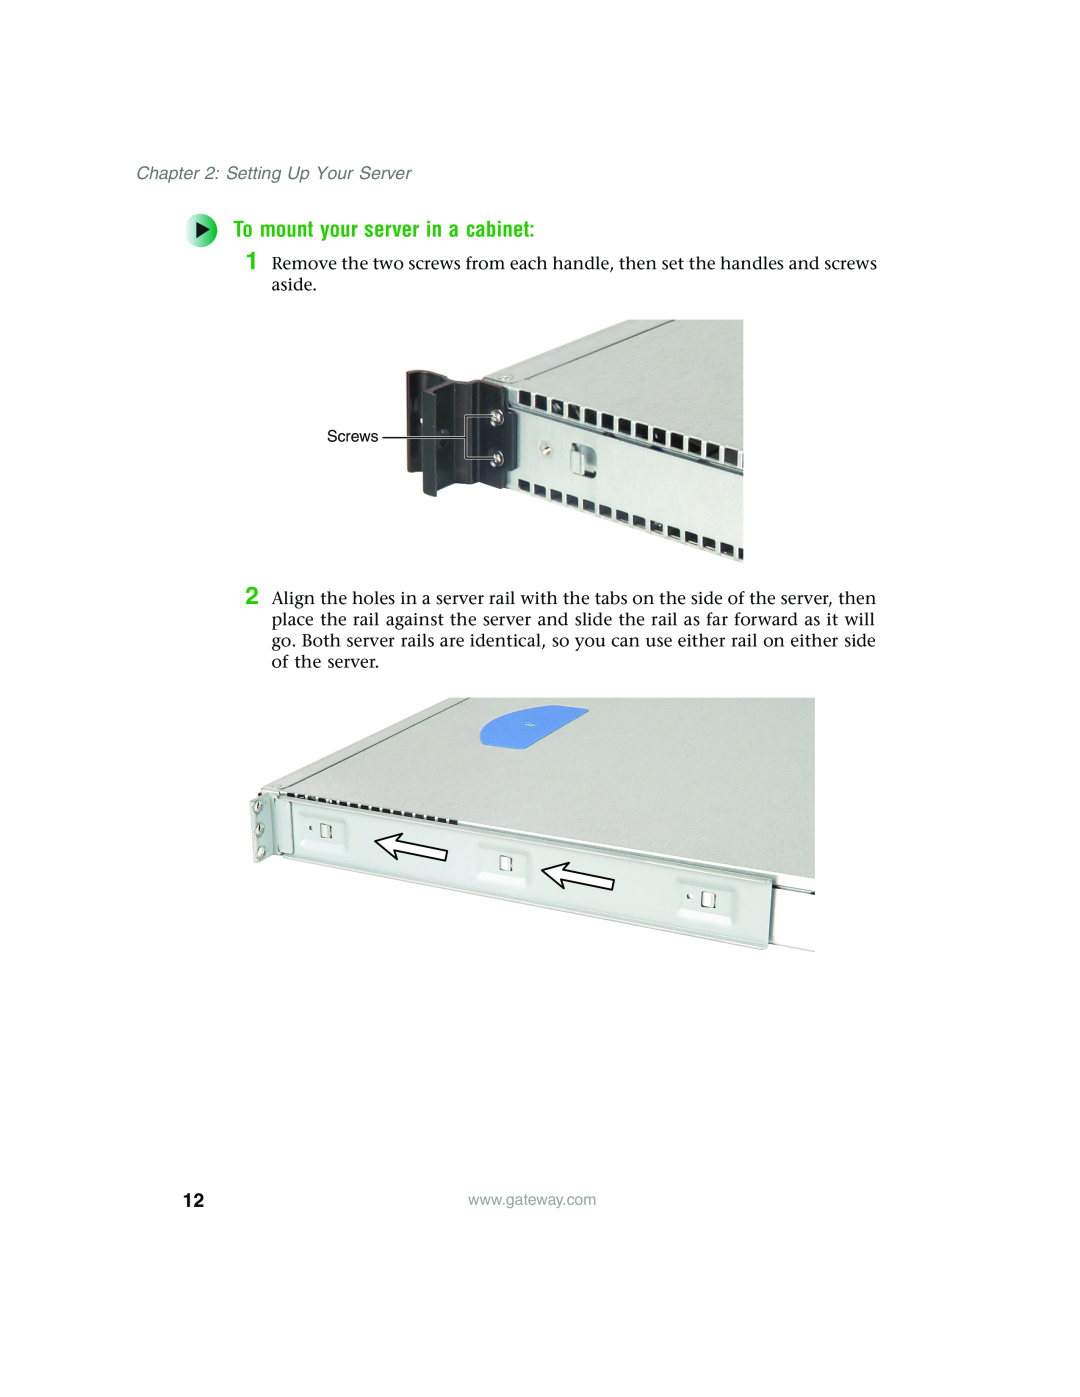 Gateway 955 manual To mount your server in a cabinet, Setting Up Your Server, Screws 